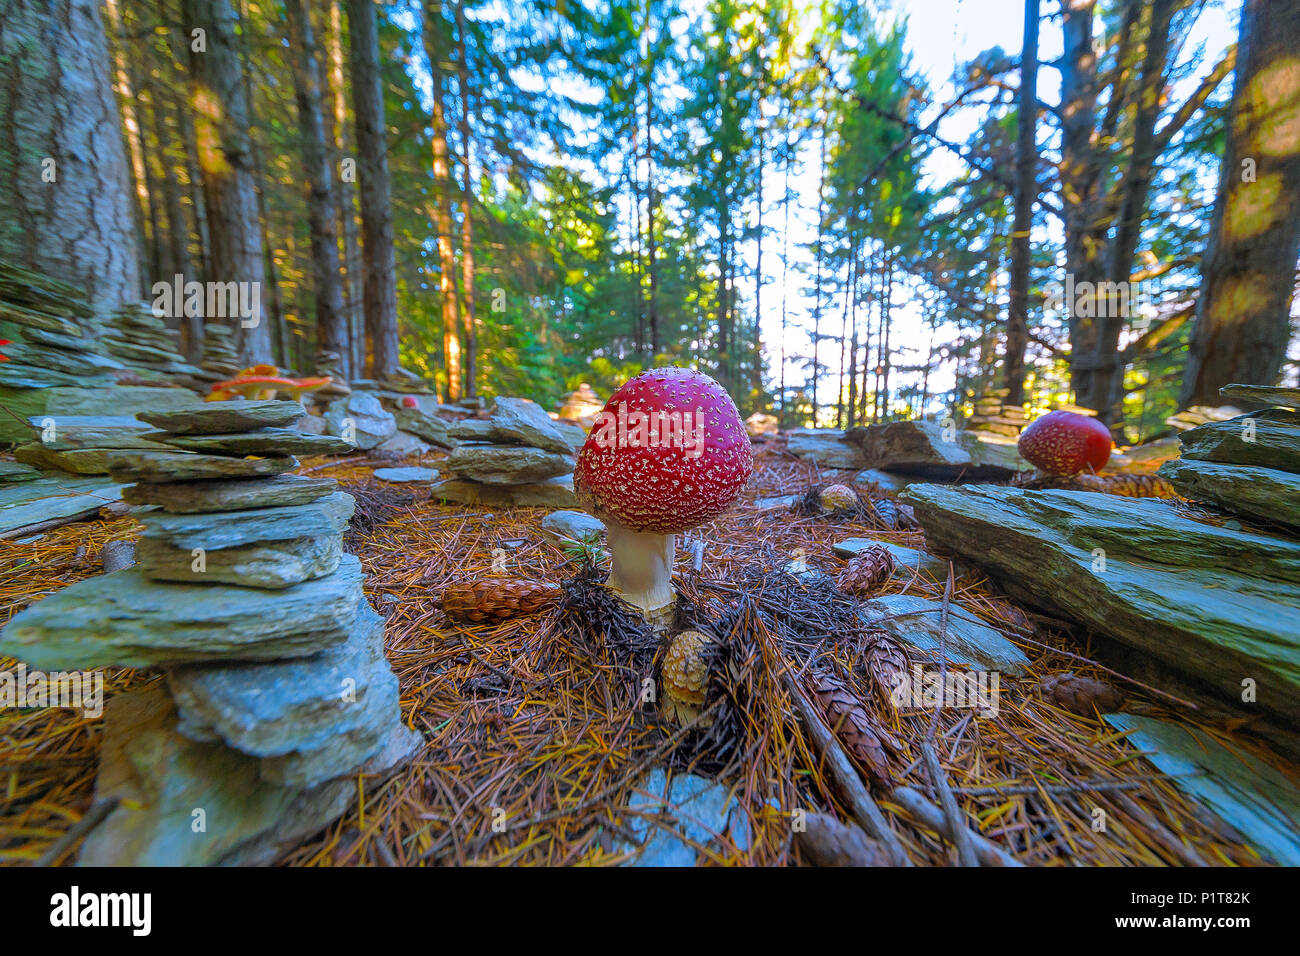 POISONOUS MUSHROOMS AND STACKING STONES. Poisonous mushroom with brightly red color cap and white spots flake grows among stacking stones in a forest. Stock Photo